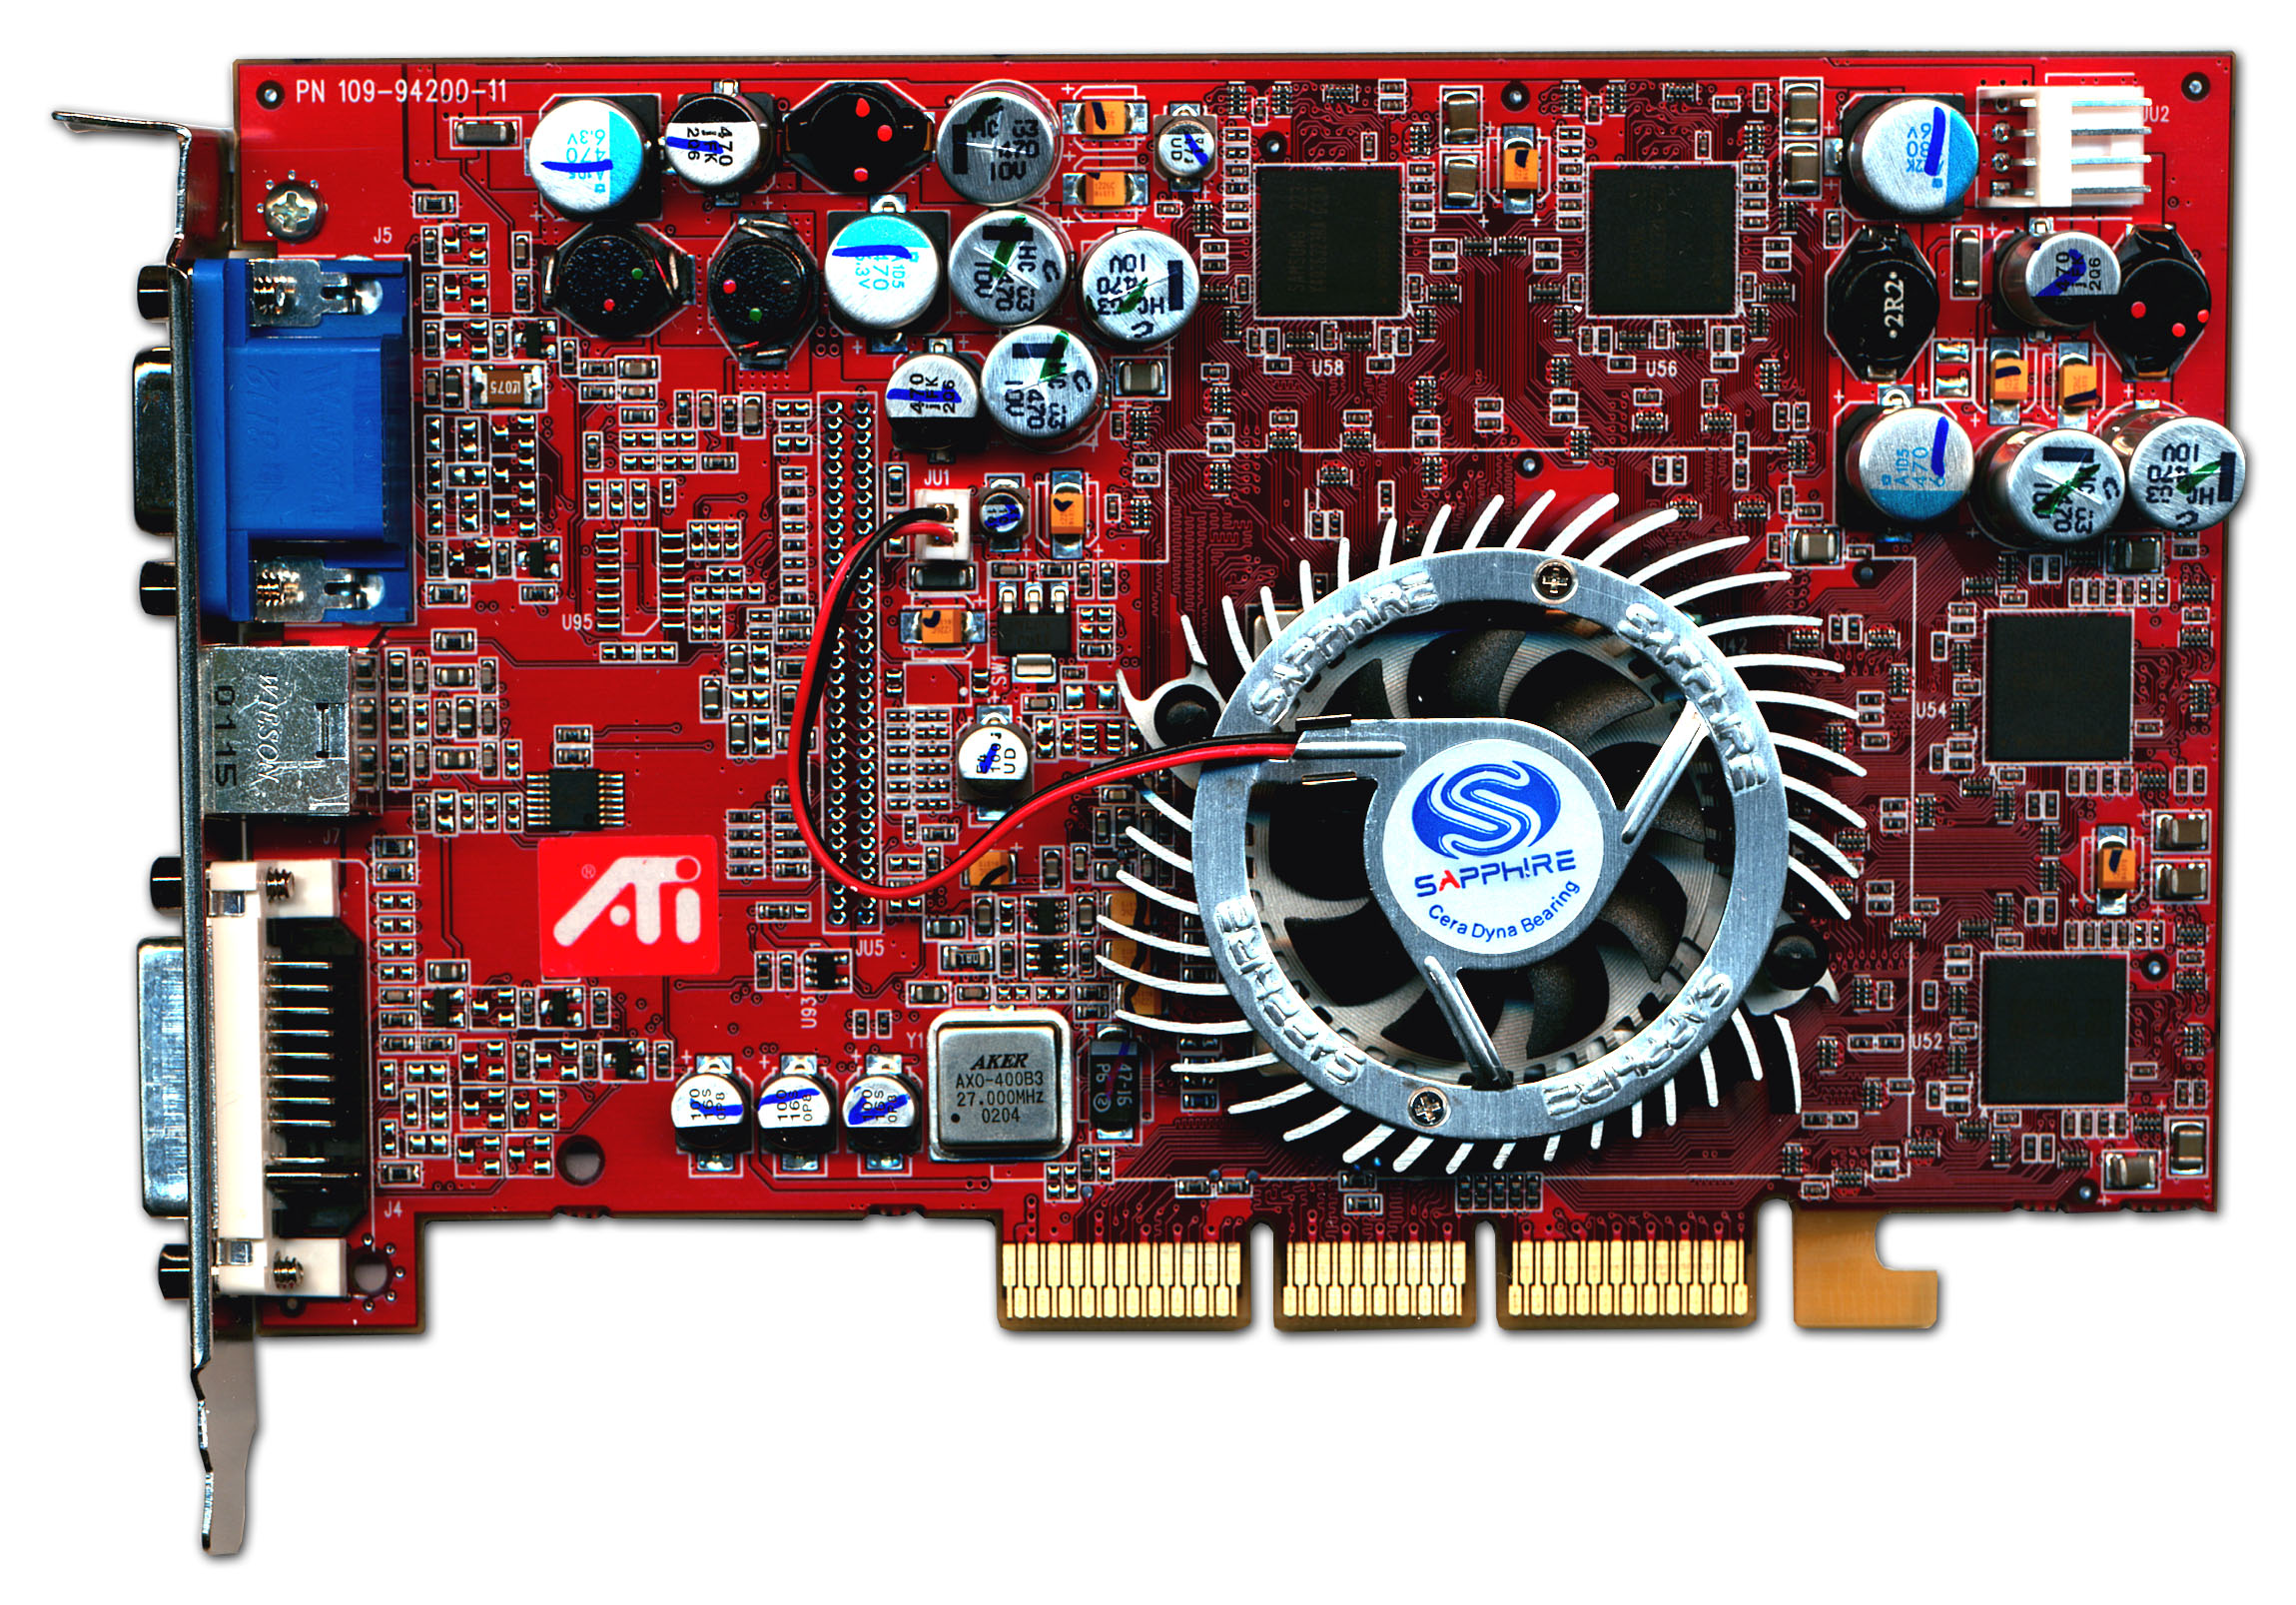 http://www.ixbt.com/video2/images/r9700-5/r9700pro-scan-front.jpg